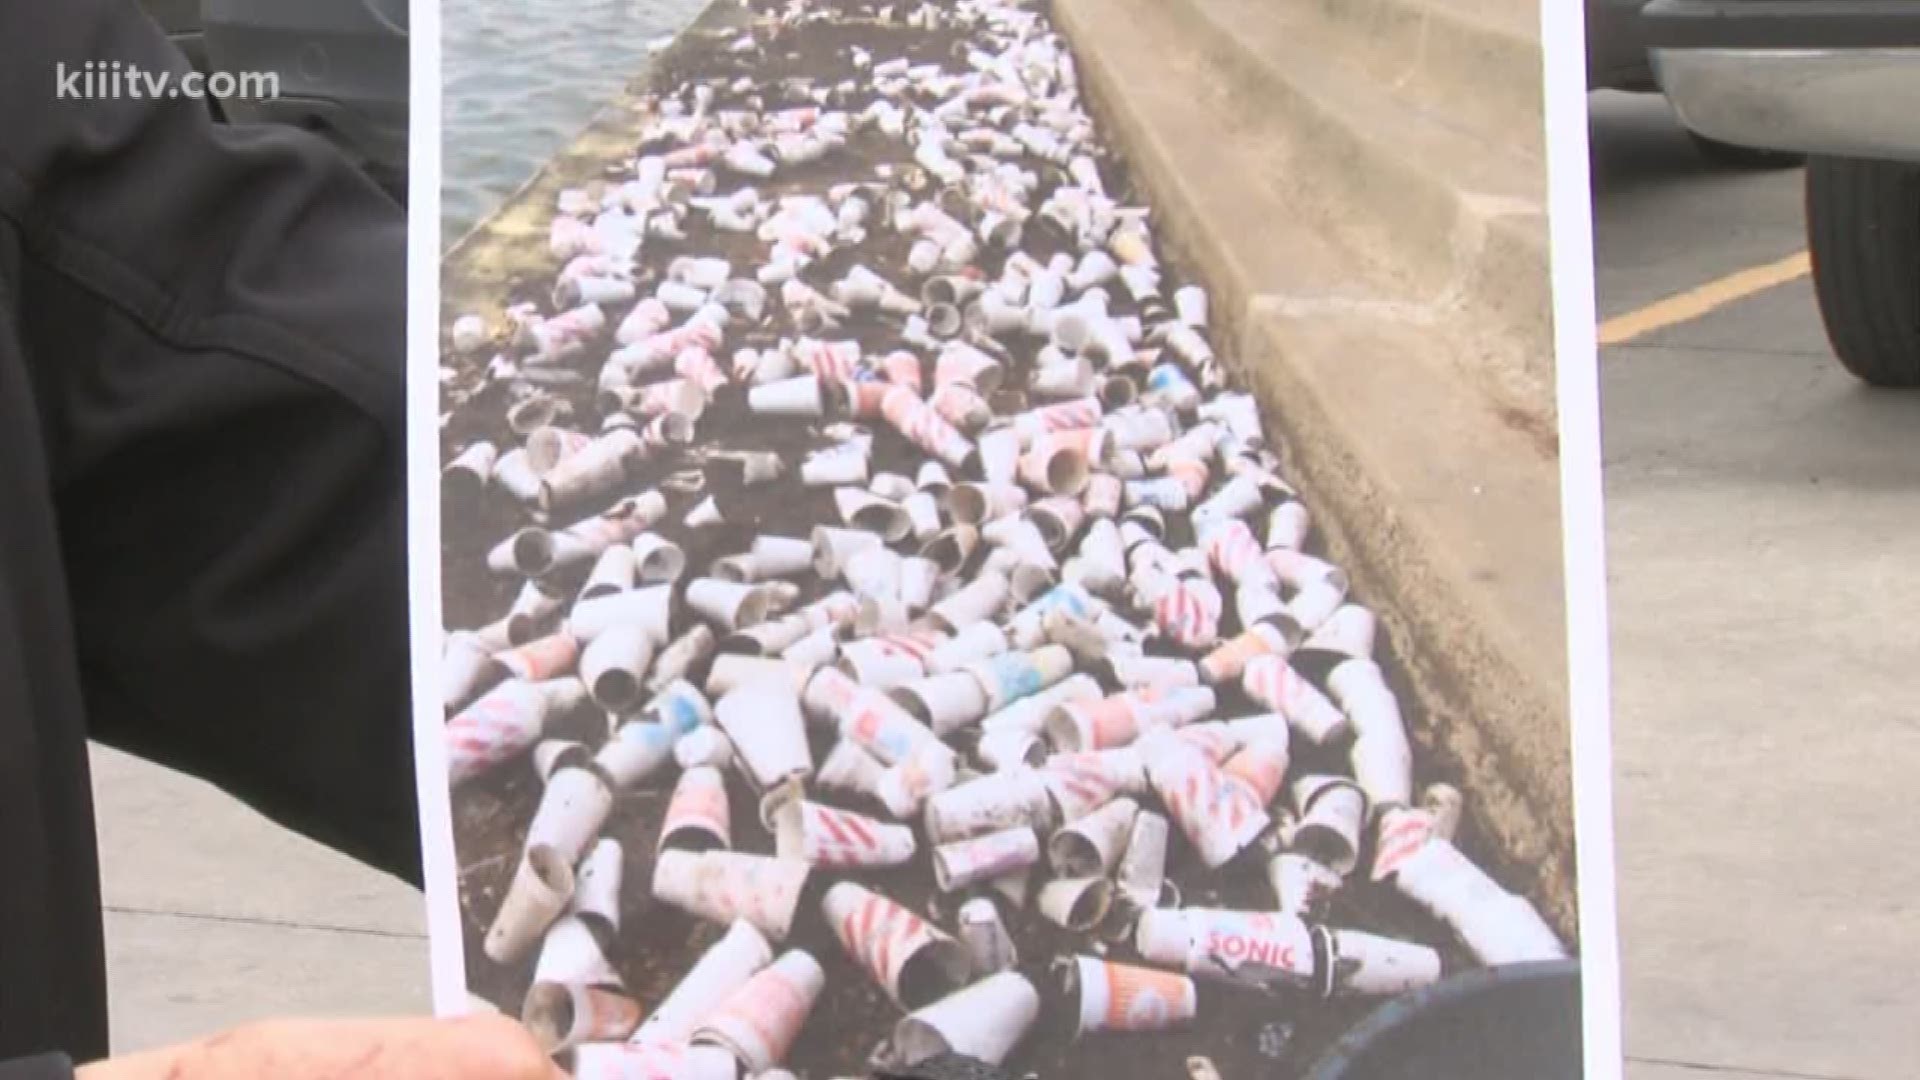 There is a national effort underway urging corporations, specifically fast food chains, to get rid of styrofoam cups.